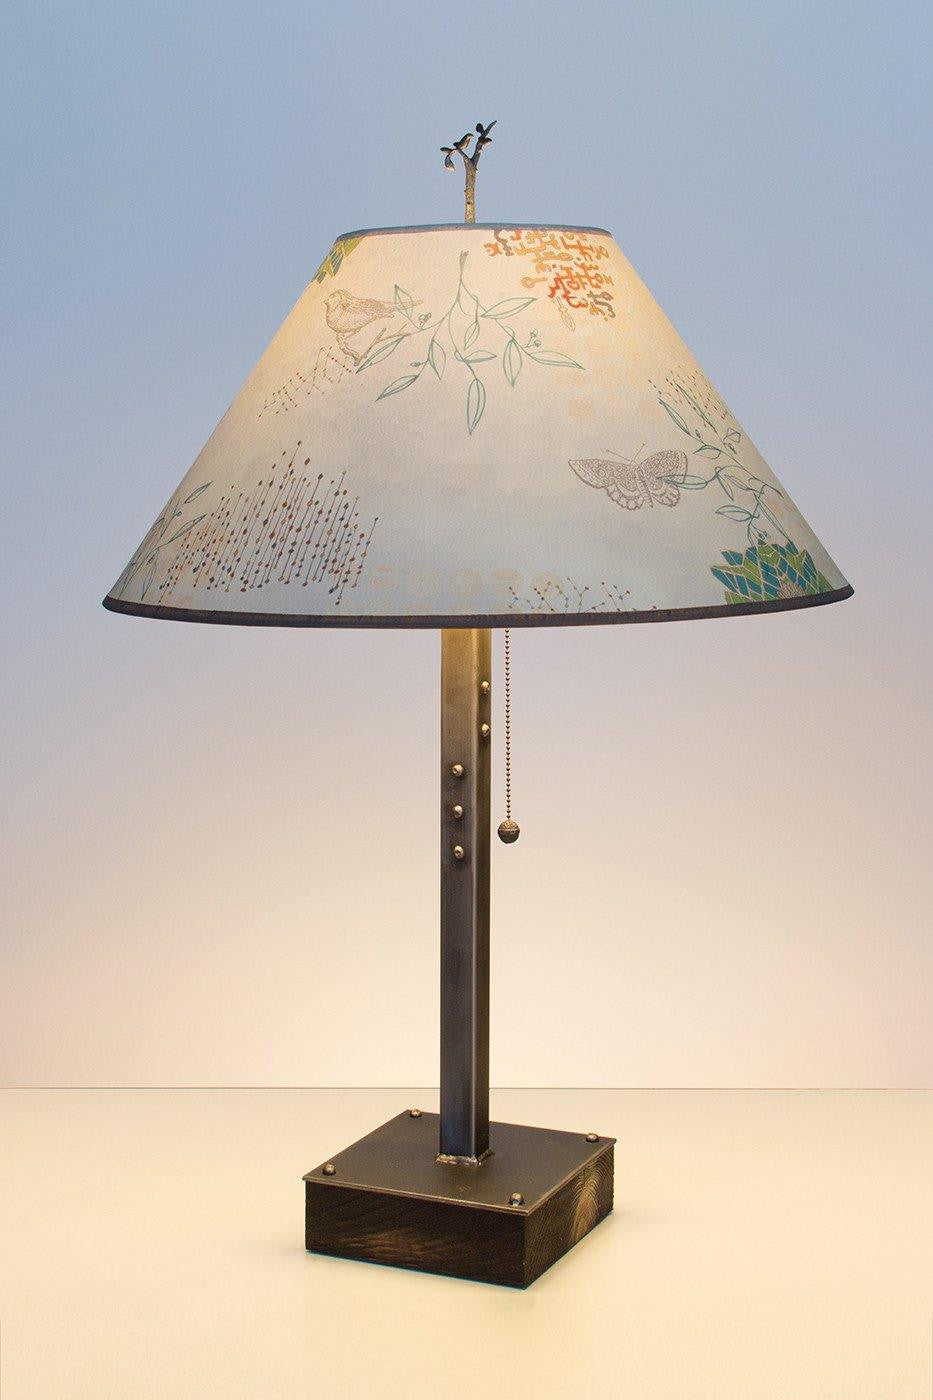 Janna Ugone &amp; Co Table Lamps Steel Table Lamp on Wood with Large Conical Shade in Ecru Journey